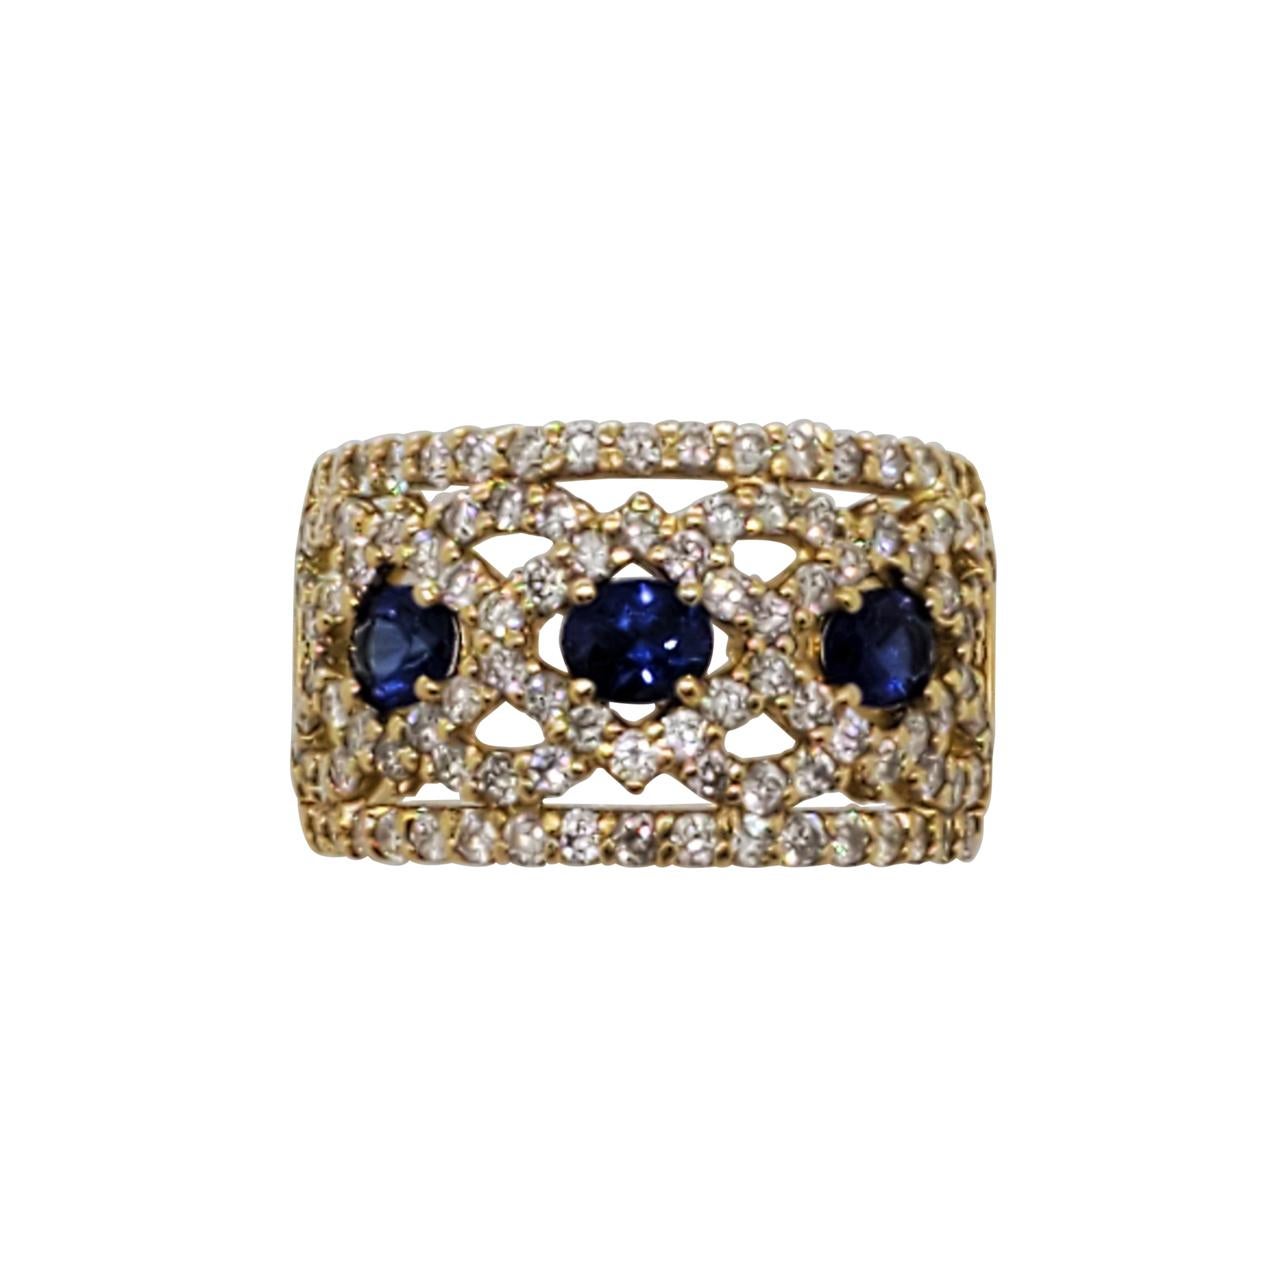 Estate Blue Sapphire Oval and White Diamond Band Ring in 18k Yellow Gold